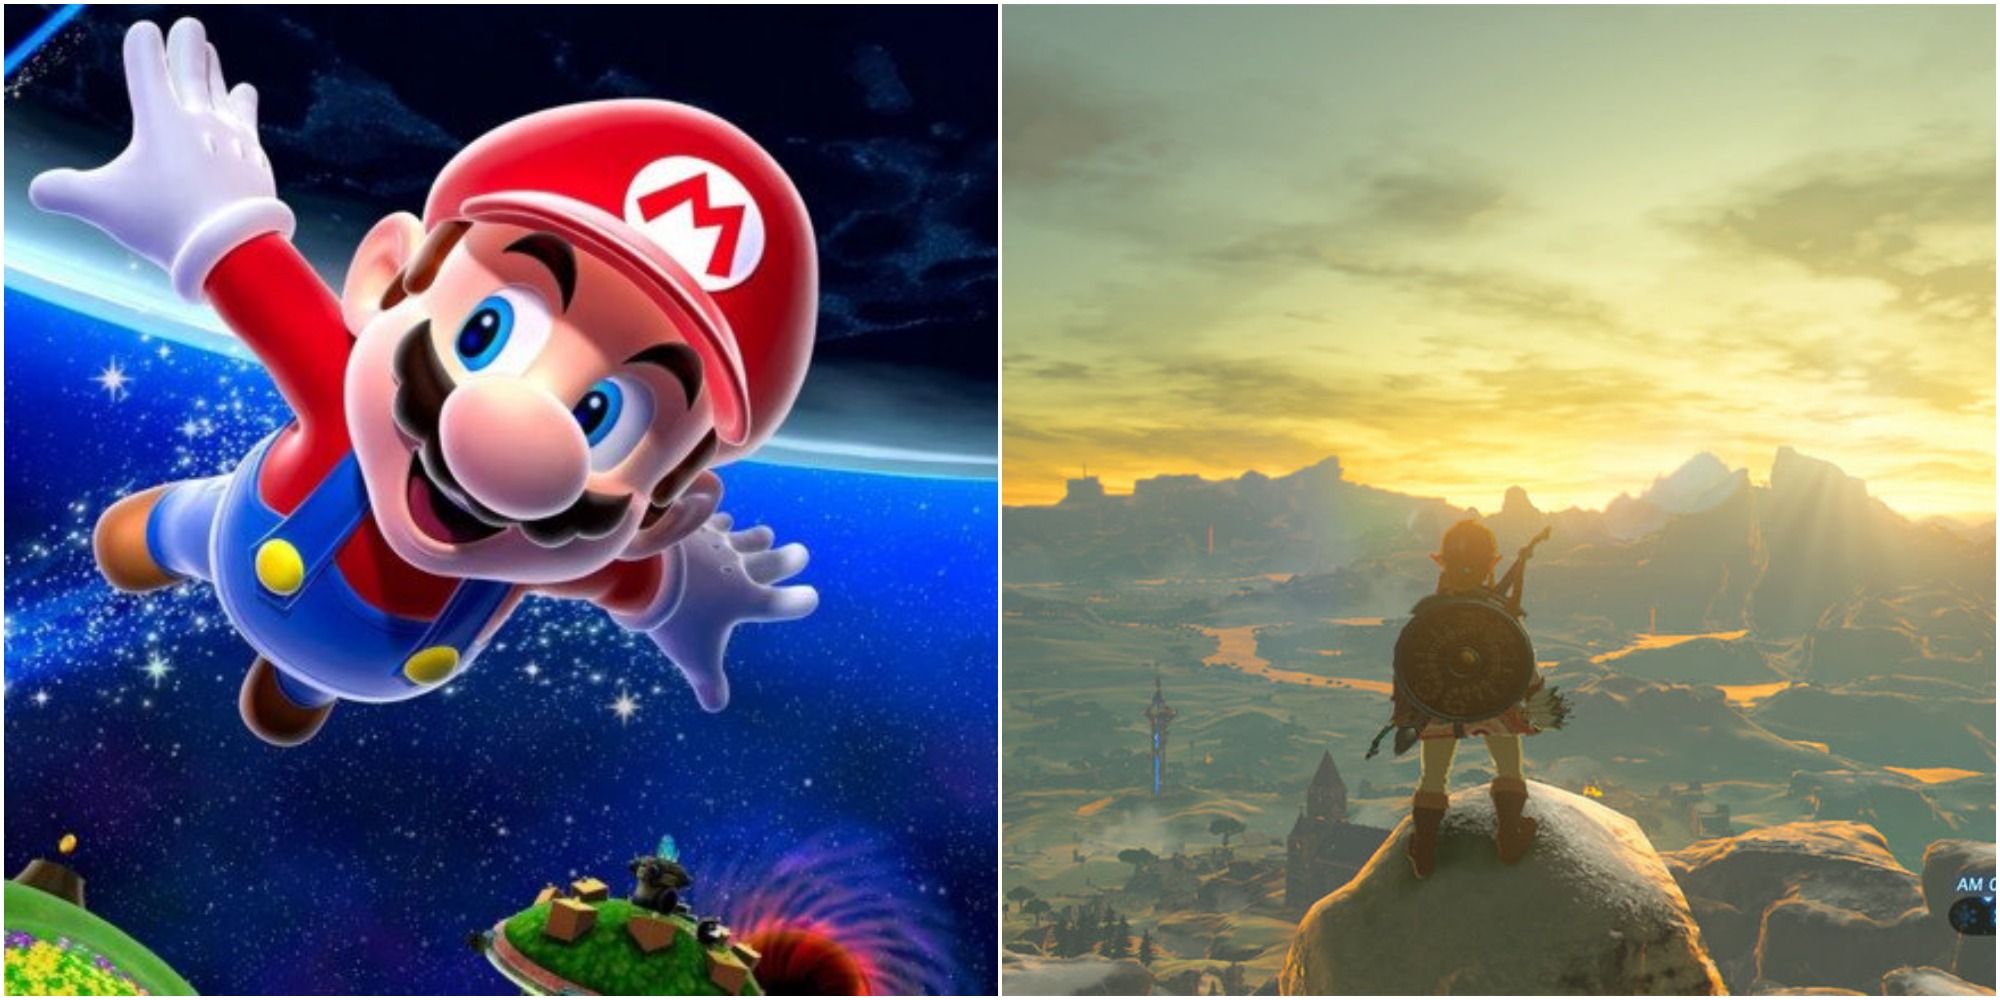 The 10 Best Nintendo Games Of All Time, According To Metacritic